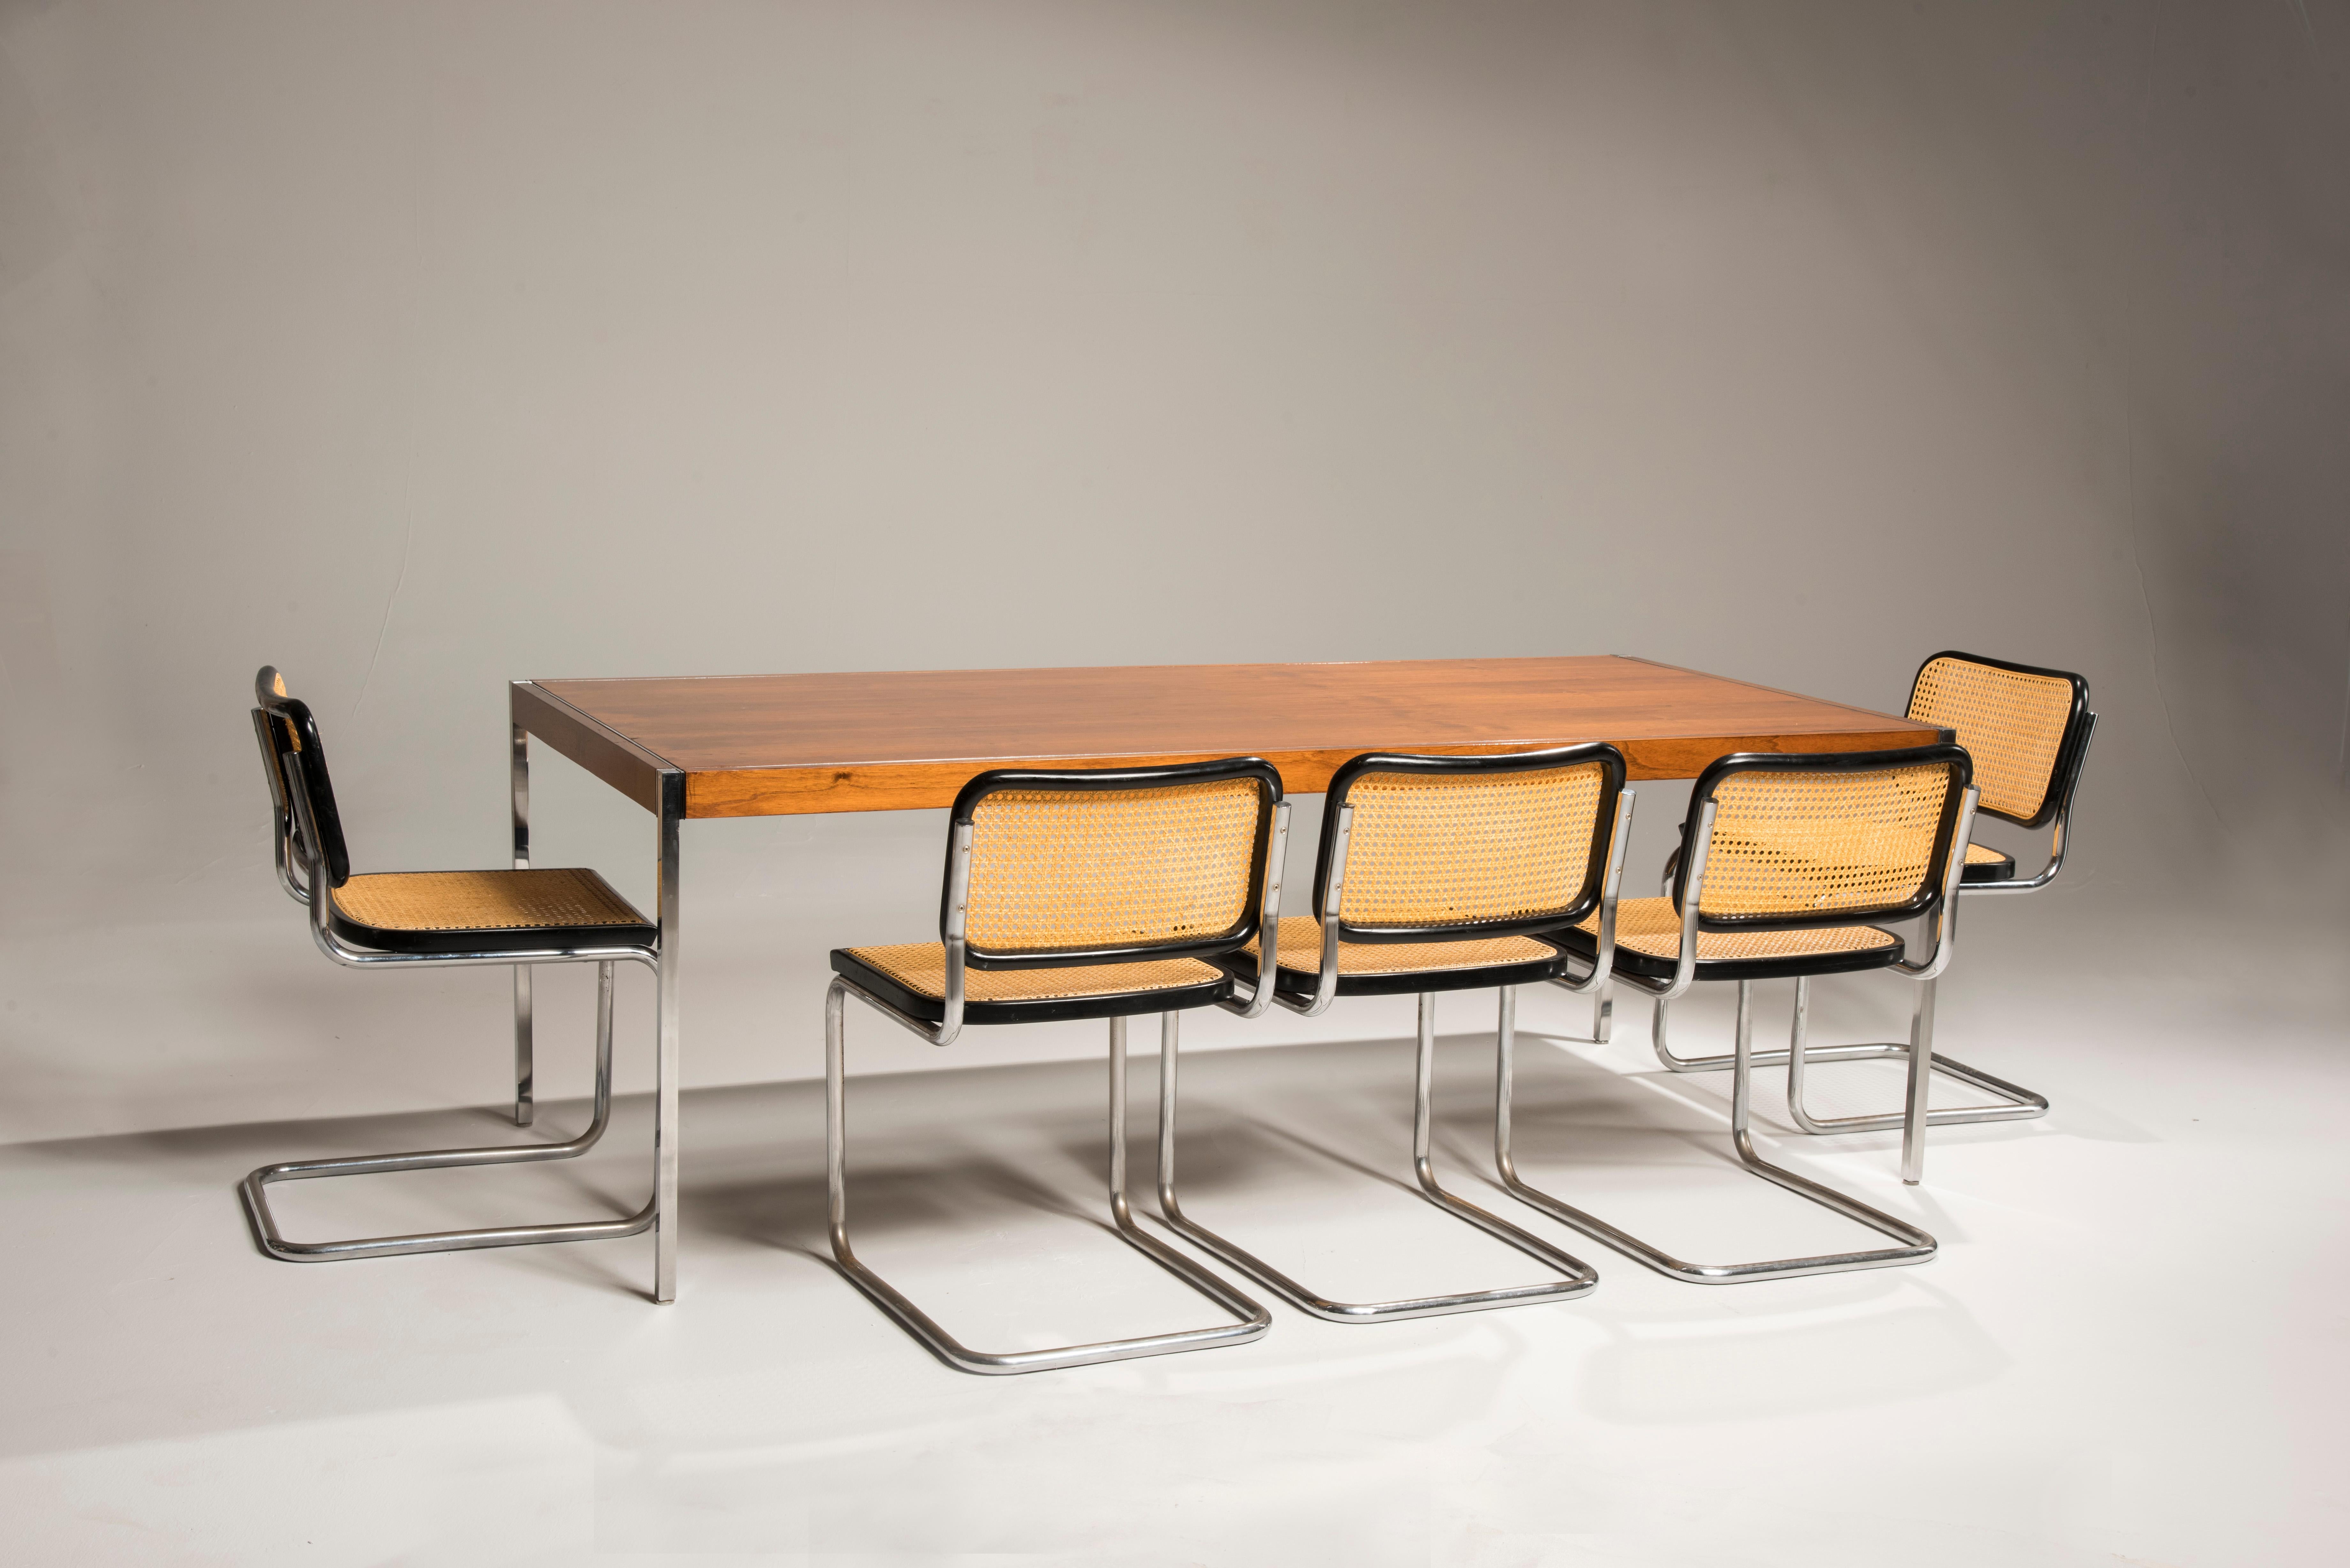 Bauhaus Marcel Breuer Cesca Chairs for Knoll Production, 18 Chairs Available 1